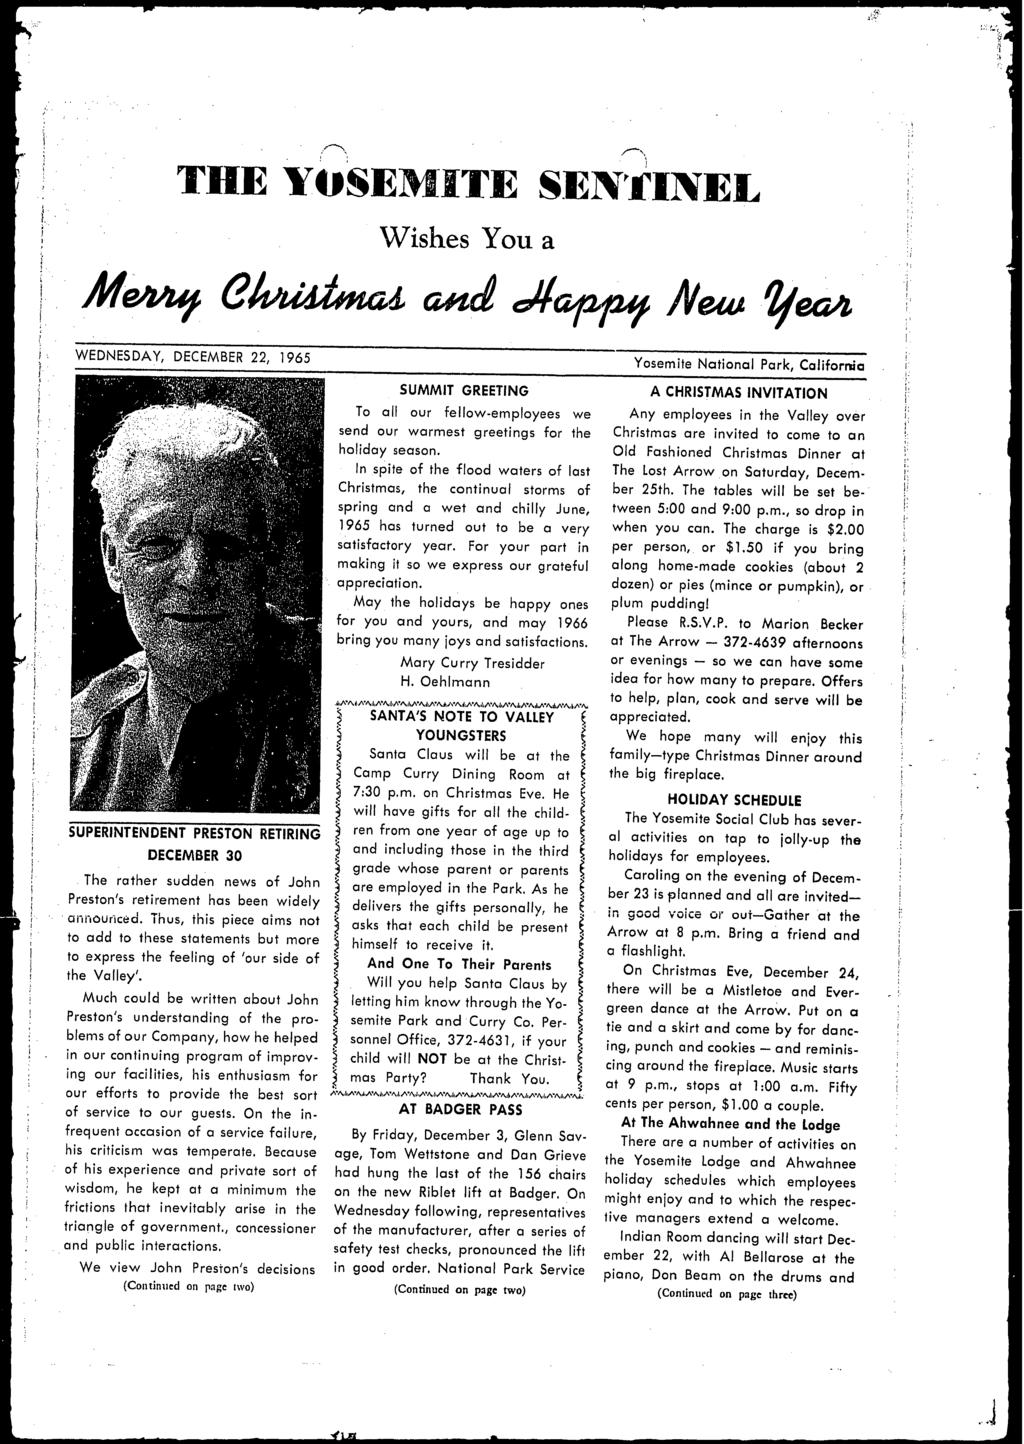 Wshes You a I. WEDNESDAY, DECEMBER 22, 1965 SUPERINTENDENT PRESTON RETIRING DECEMBER 30 The rather sudden news of John Preston s retrement has been wdely a-,~our~ced.